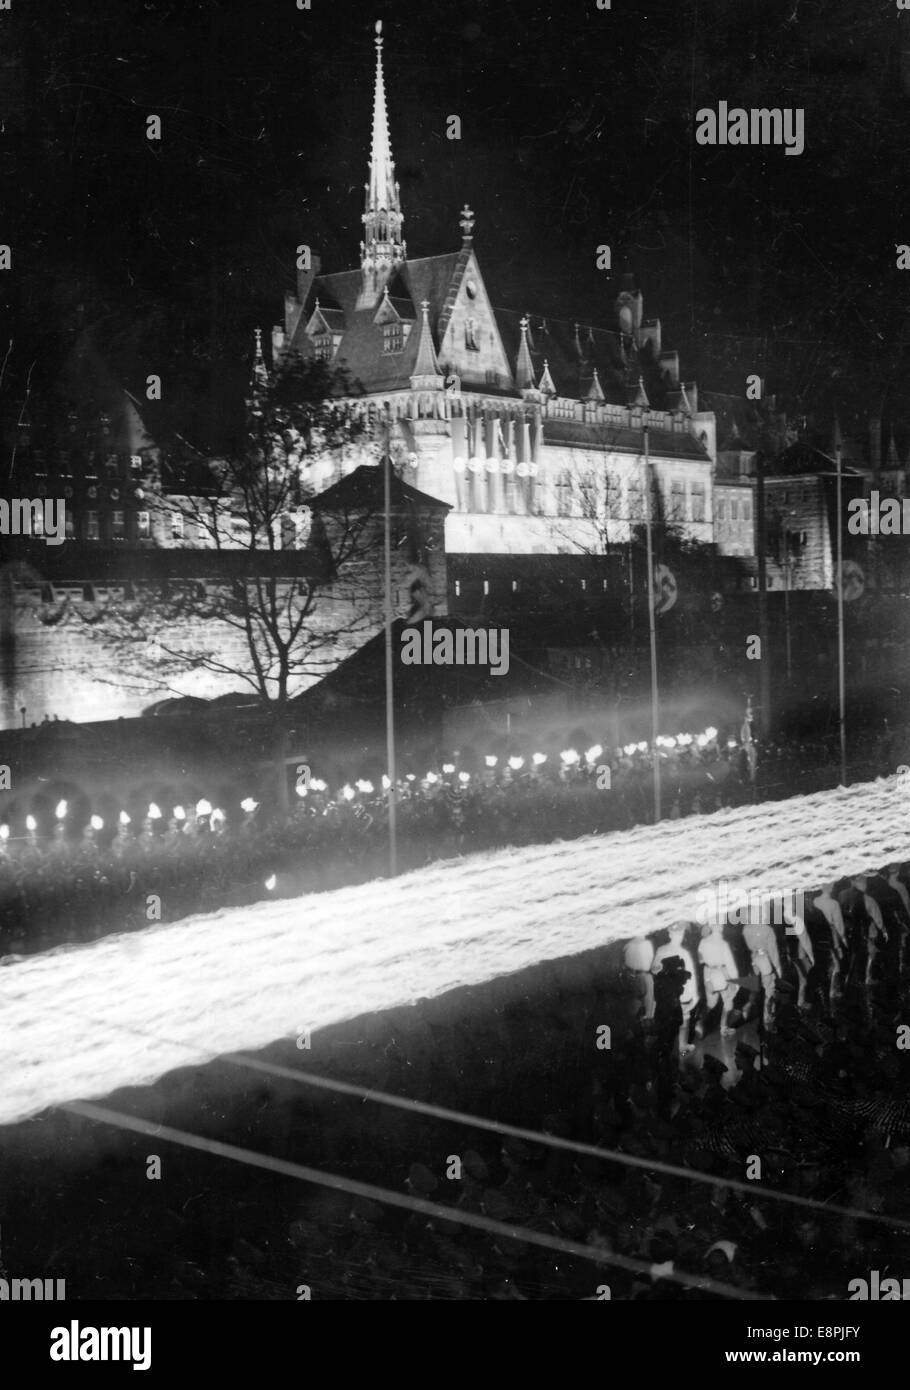 Nuremberg Rally 1937 in Nuremberg, Germany - March-past of the great torchlight procession of the political leaders in front of Adolf Hitler on the balcony of the Hotel 'Deutscher Hof'. Fotoarchiv für Zeitgeschichtee - NO WIRE SERVICE – Stock Photo